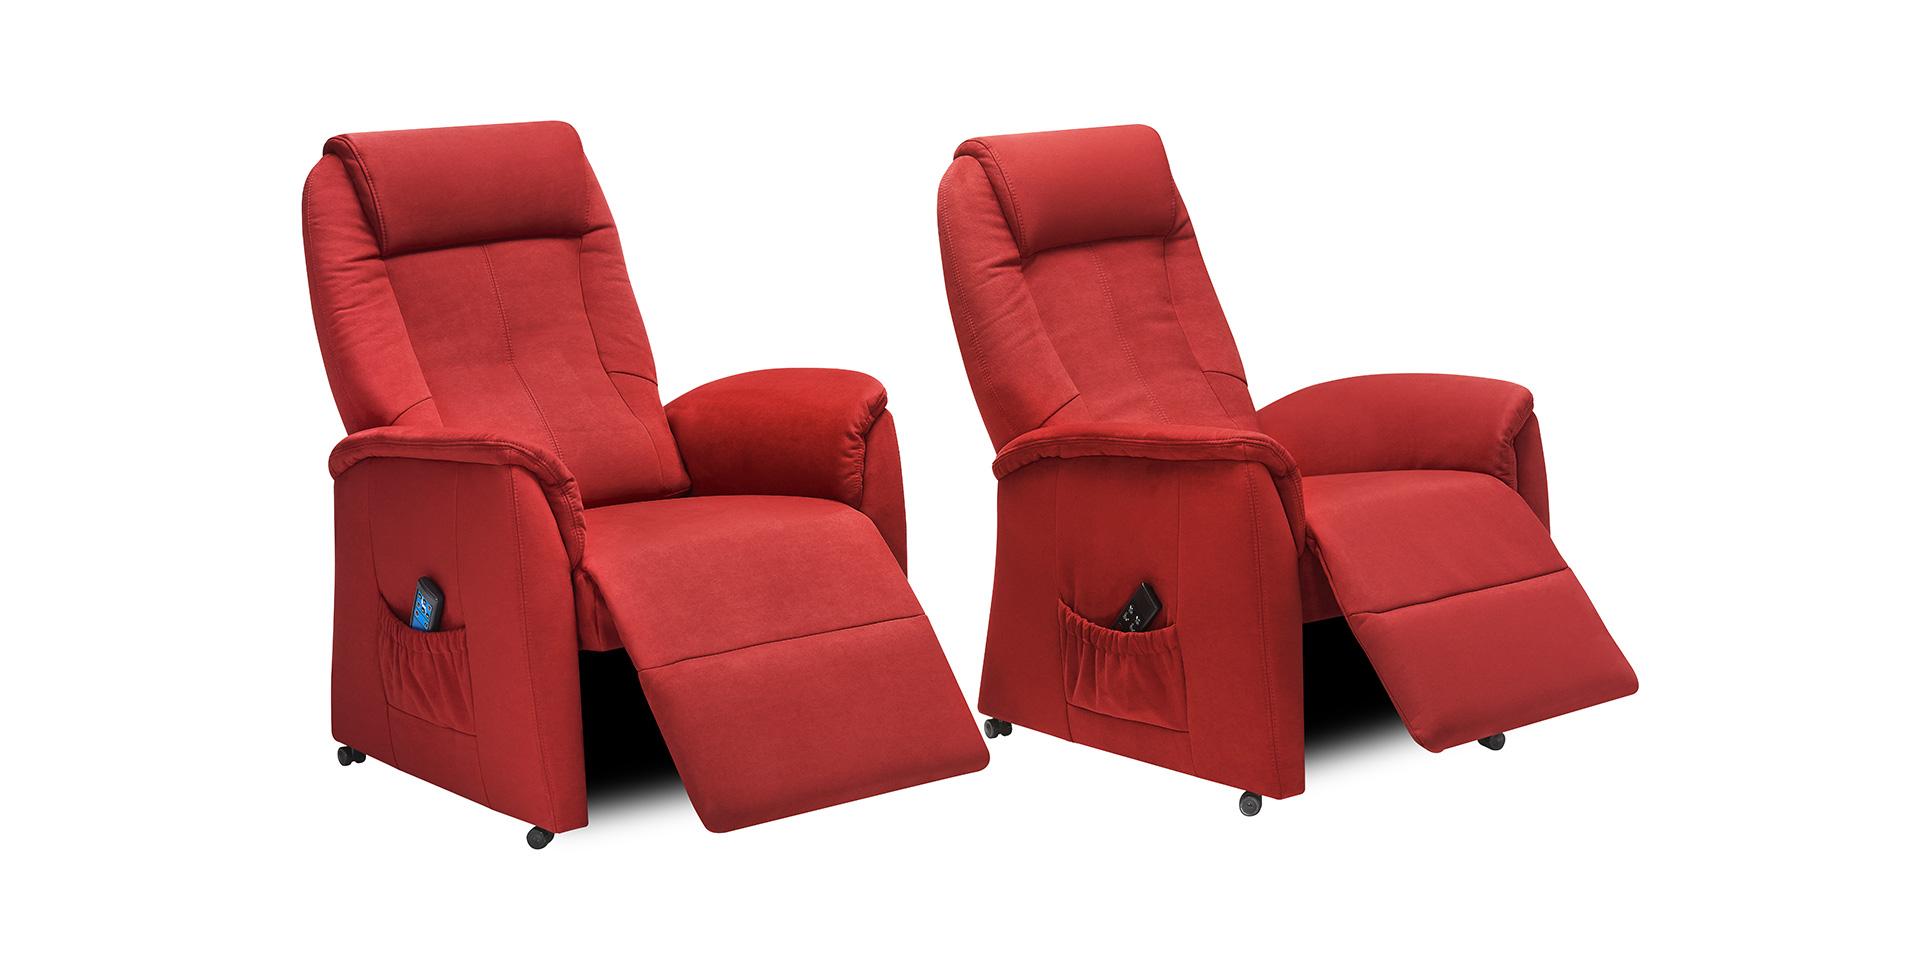 Slider Fauteuil relaxation 9107 (image 1)